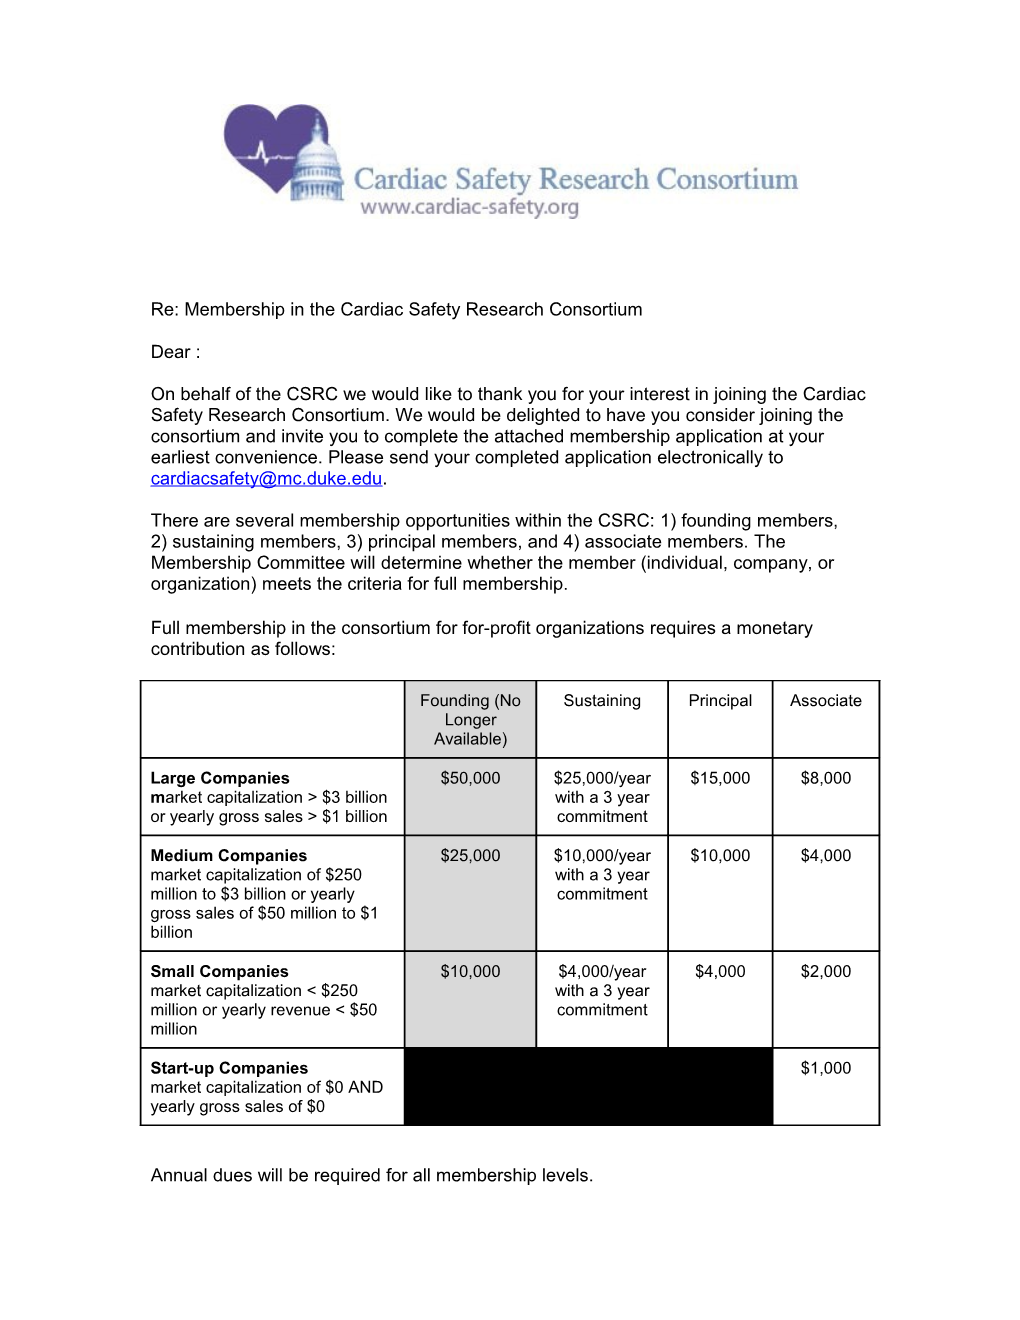 Re: Membership in the Cardiac Safety Research Consortium